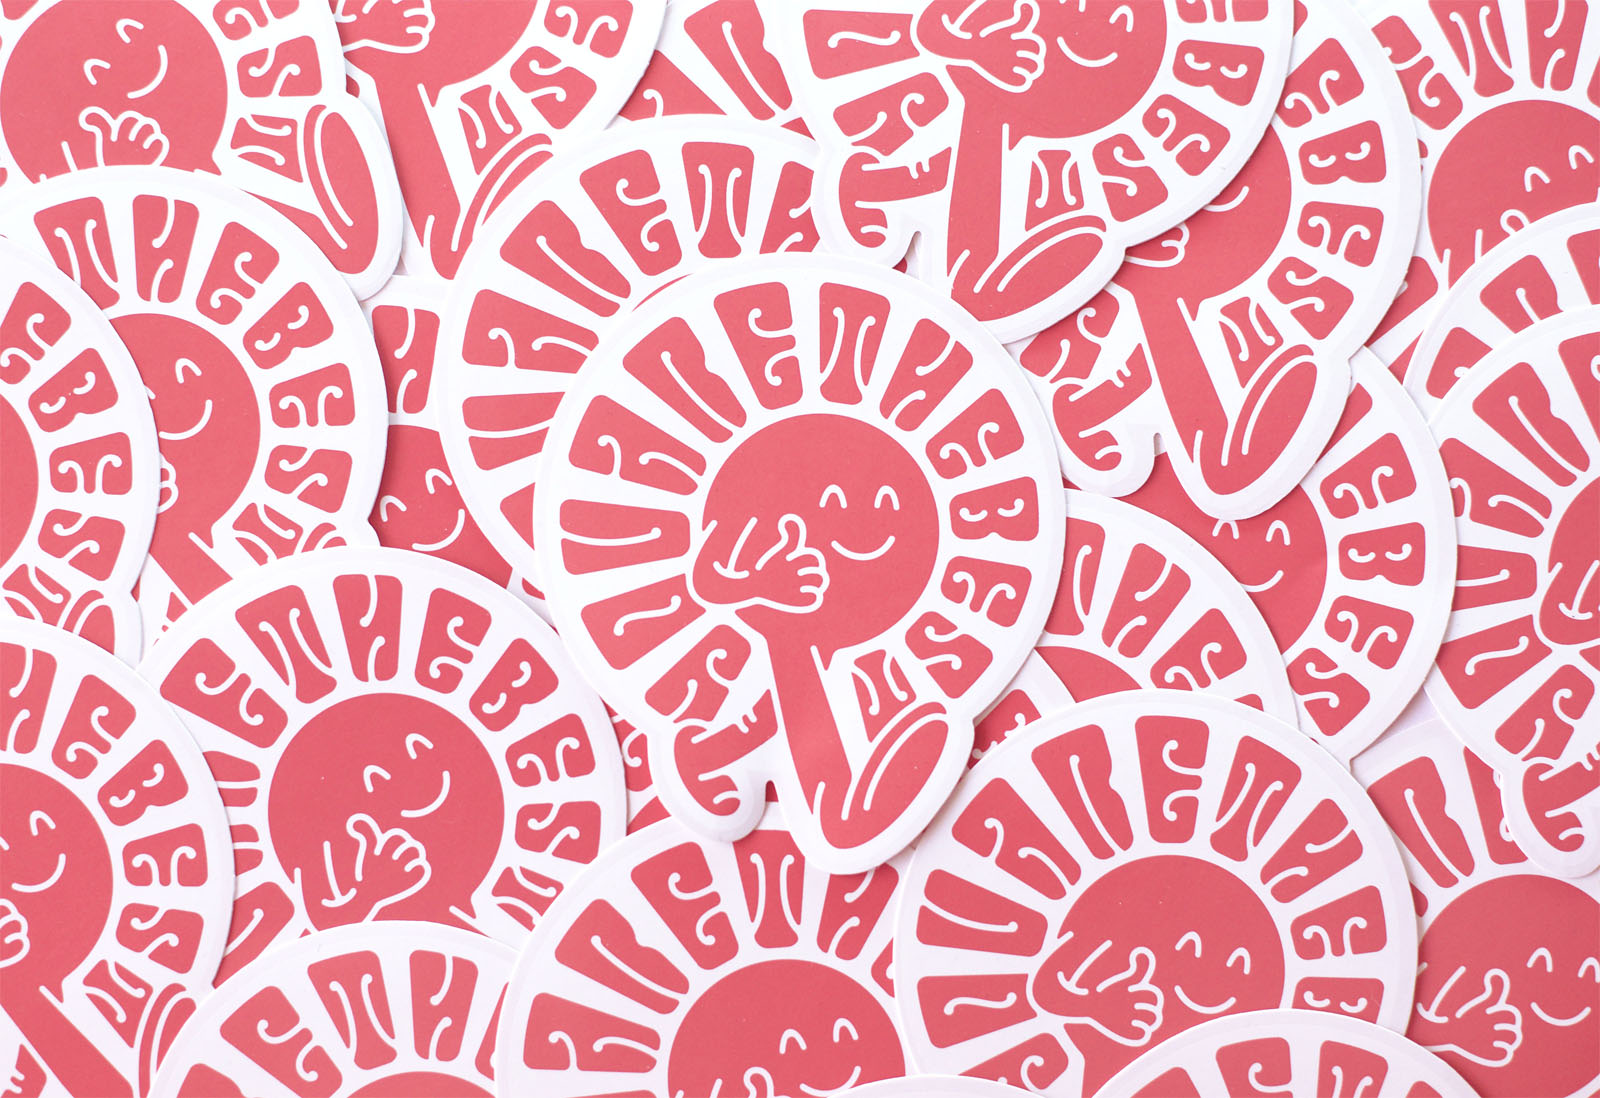 You are the best sticker by Olga Vasik on Dribbble